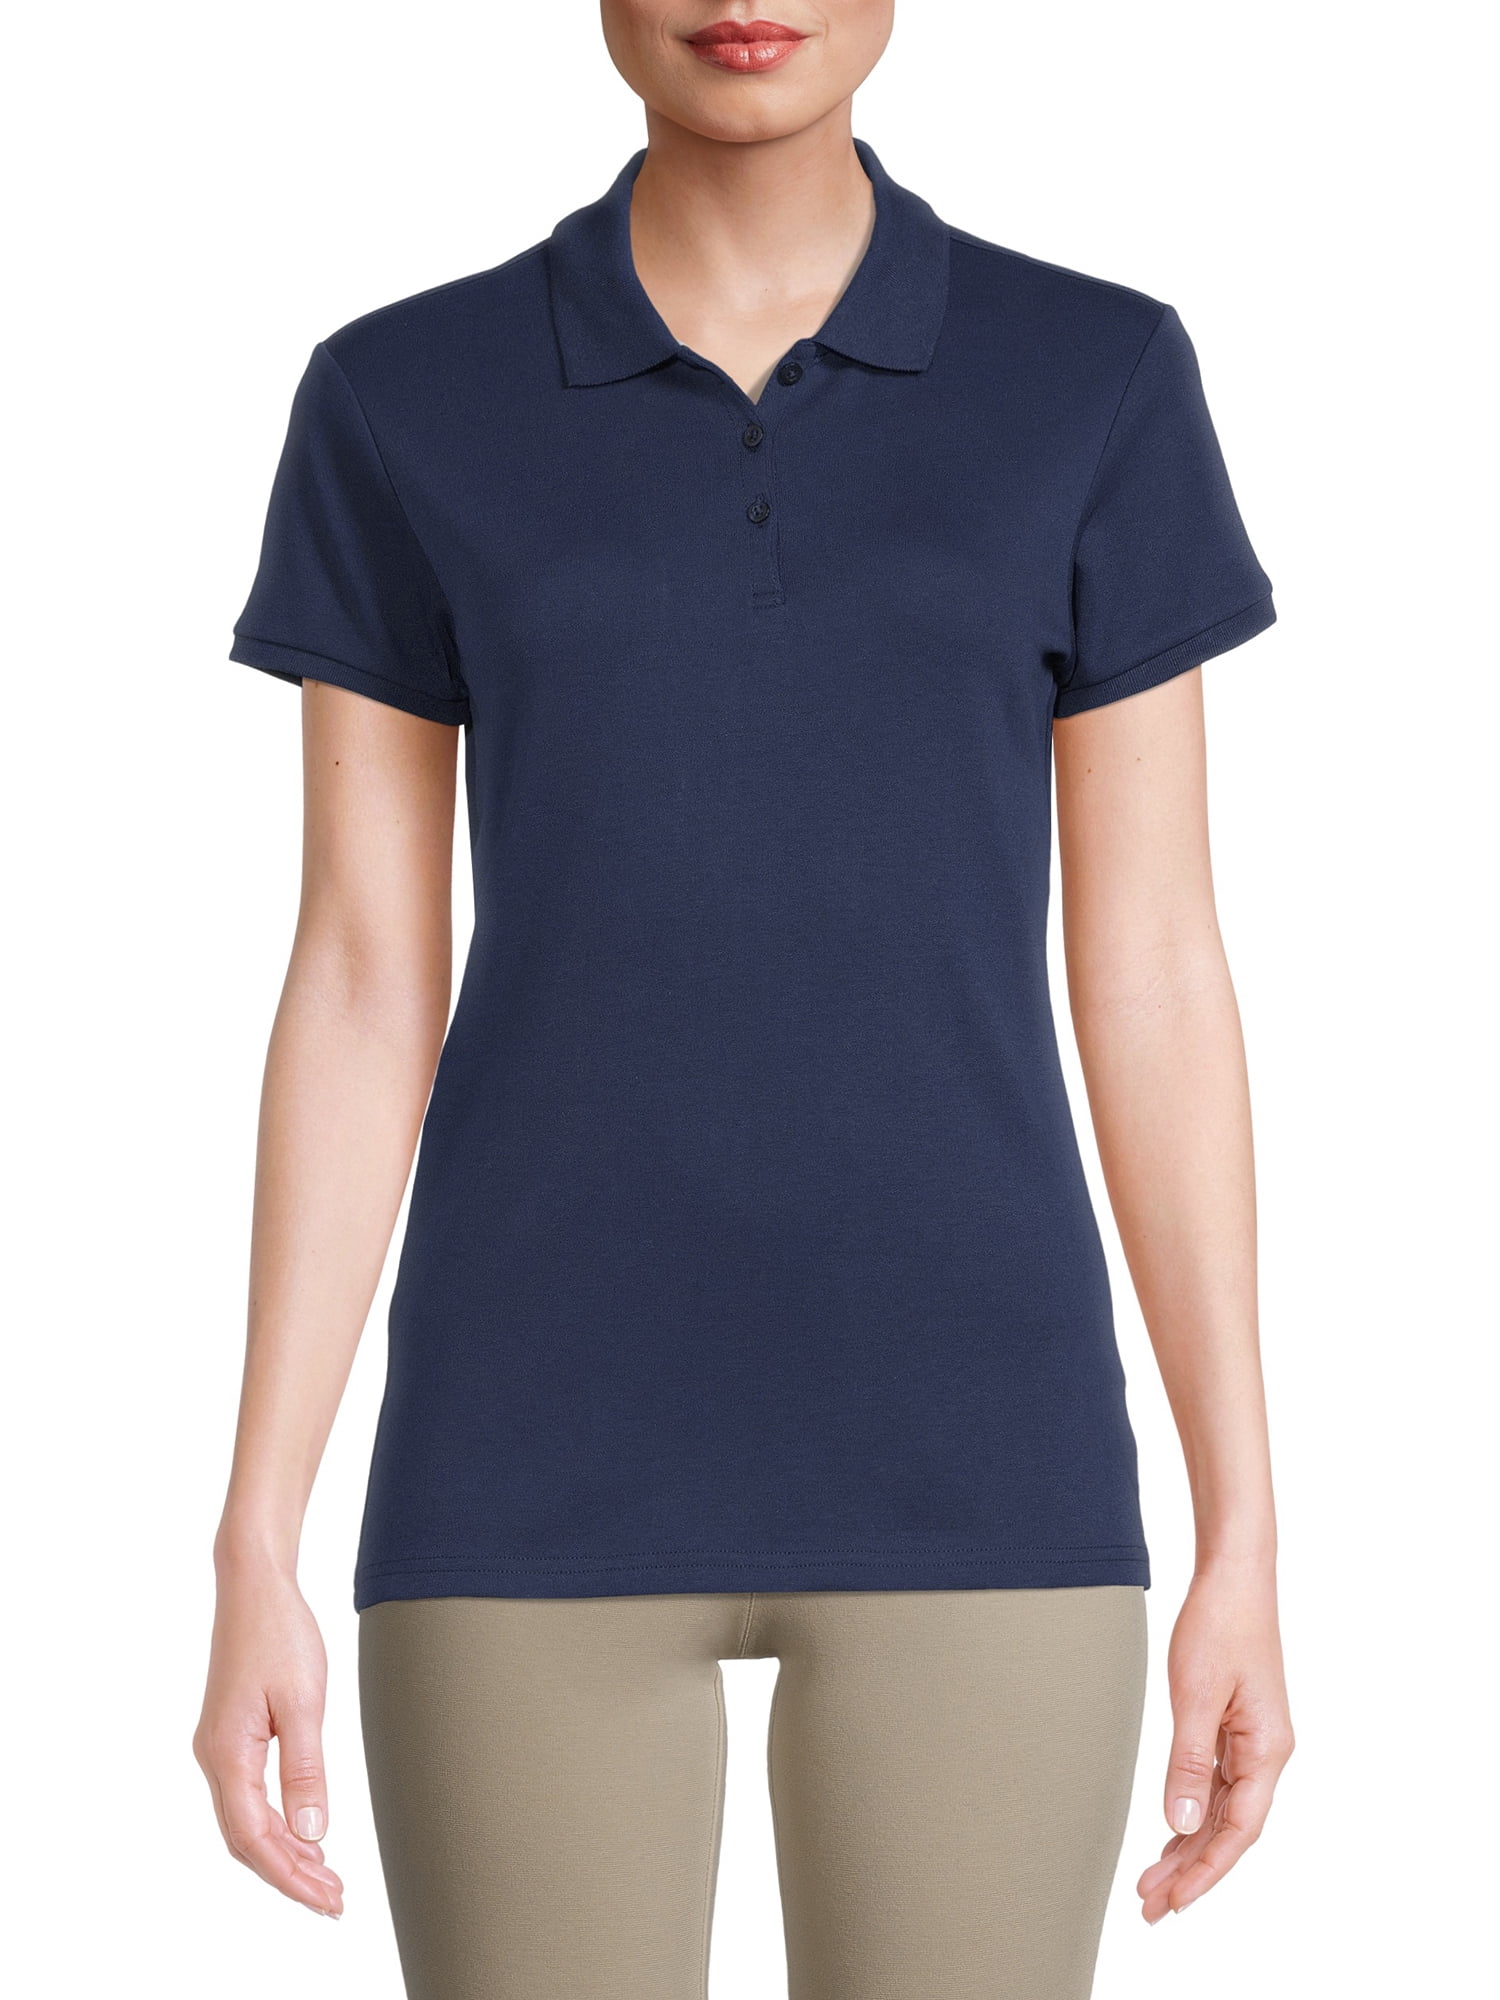 CLASSROOM Juniors Short-Sleeve Fitted Polo Shirt 